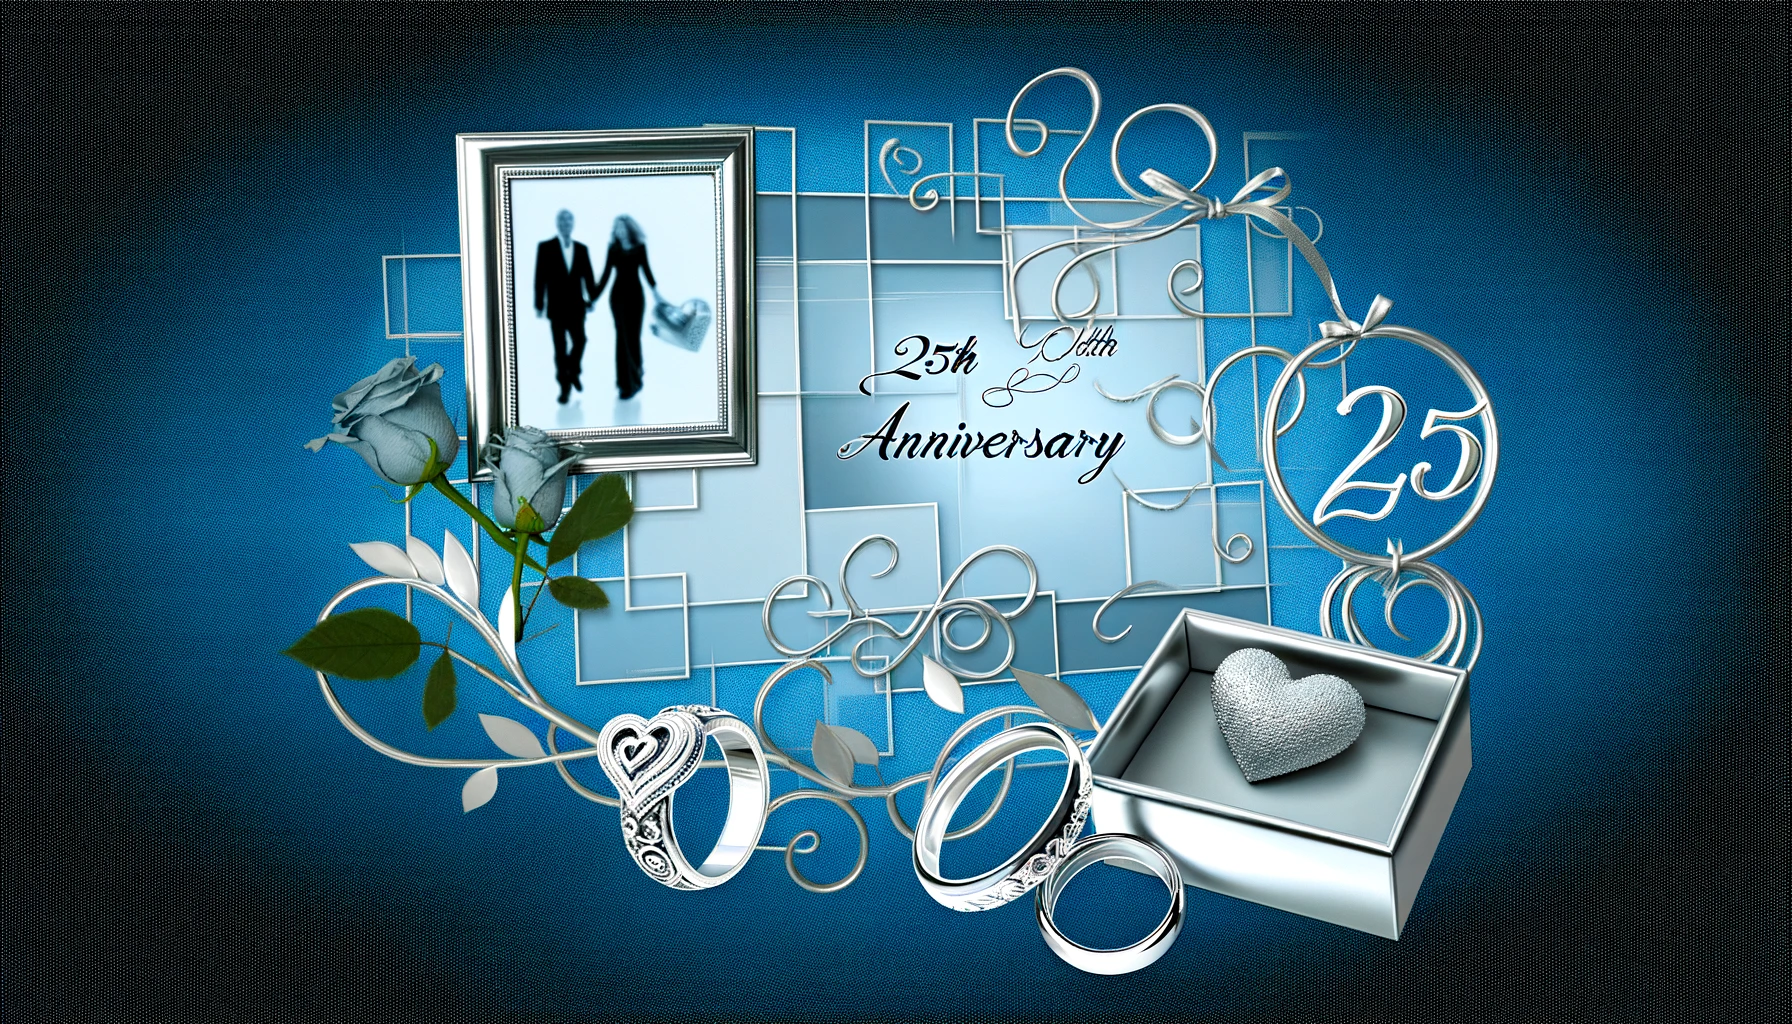 Quotes and Wishes for 25th Wedding Anniversary